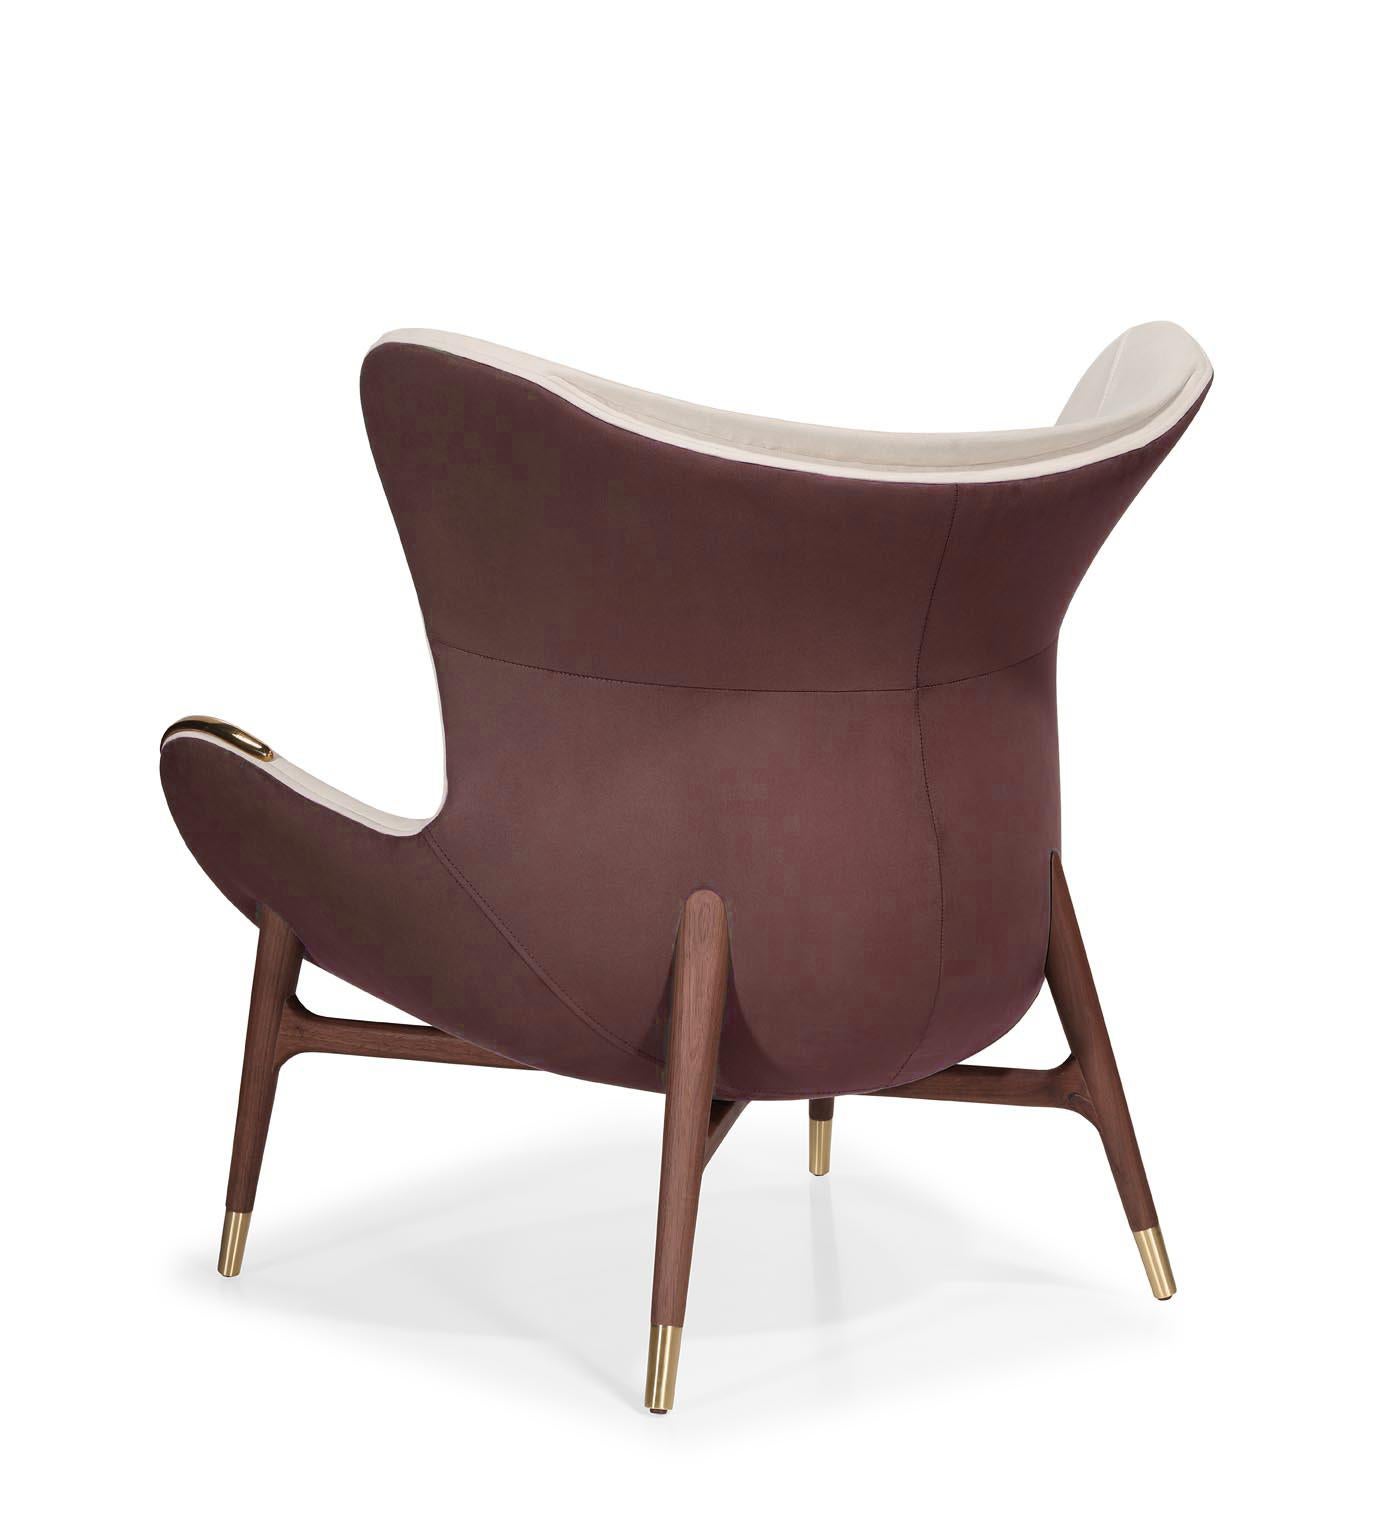 A true statement of luxury
Combining the finest and ancient craftsmanship with luxurious levels of design, quality, and comfort. 

Nazaré Armchair, Modern Collection, Walnut Wood, Suede Fabric - Traditional Handcrafted in Portugal 

It is made with